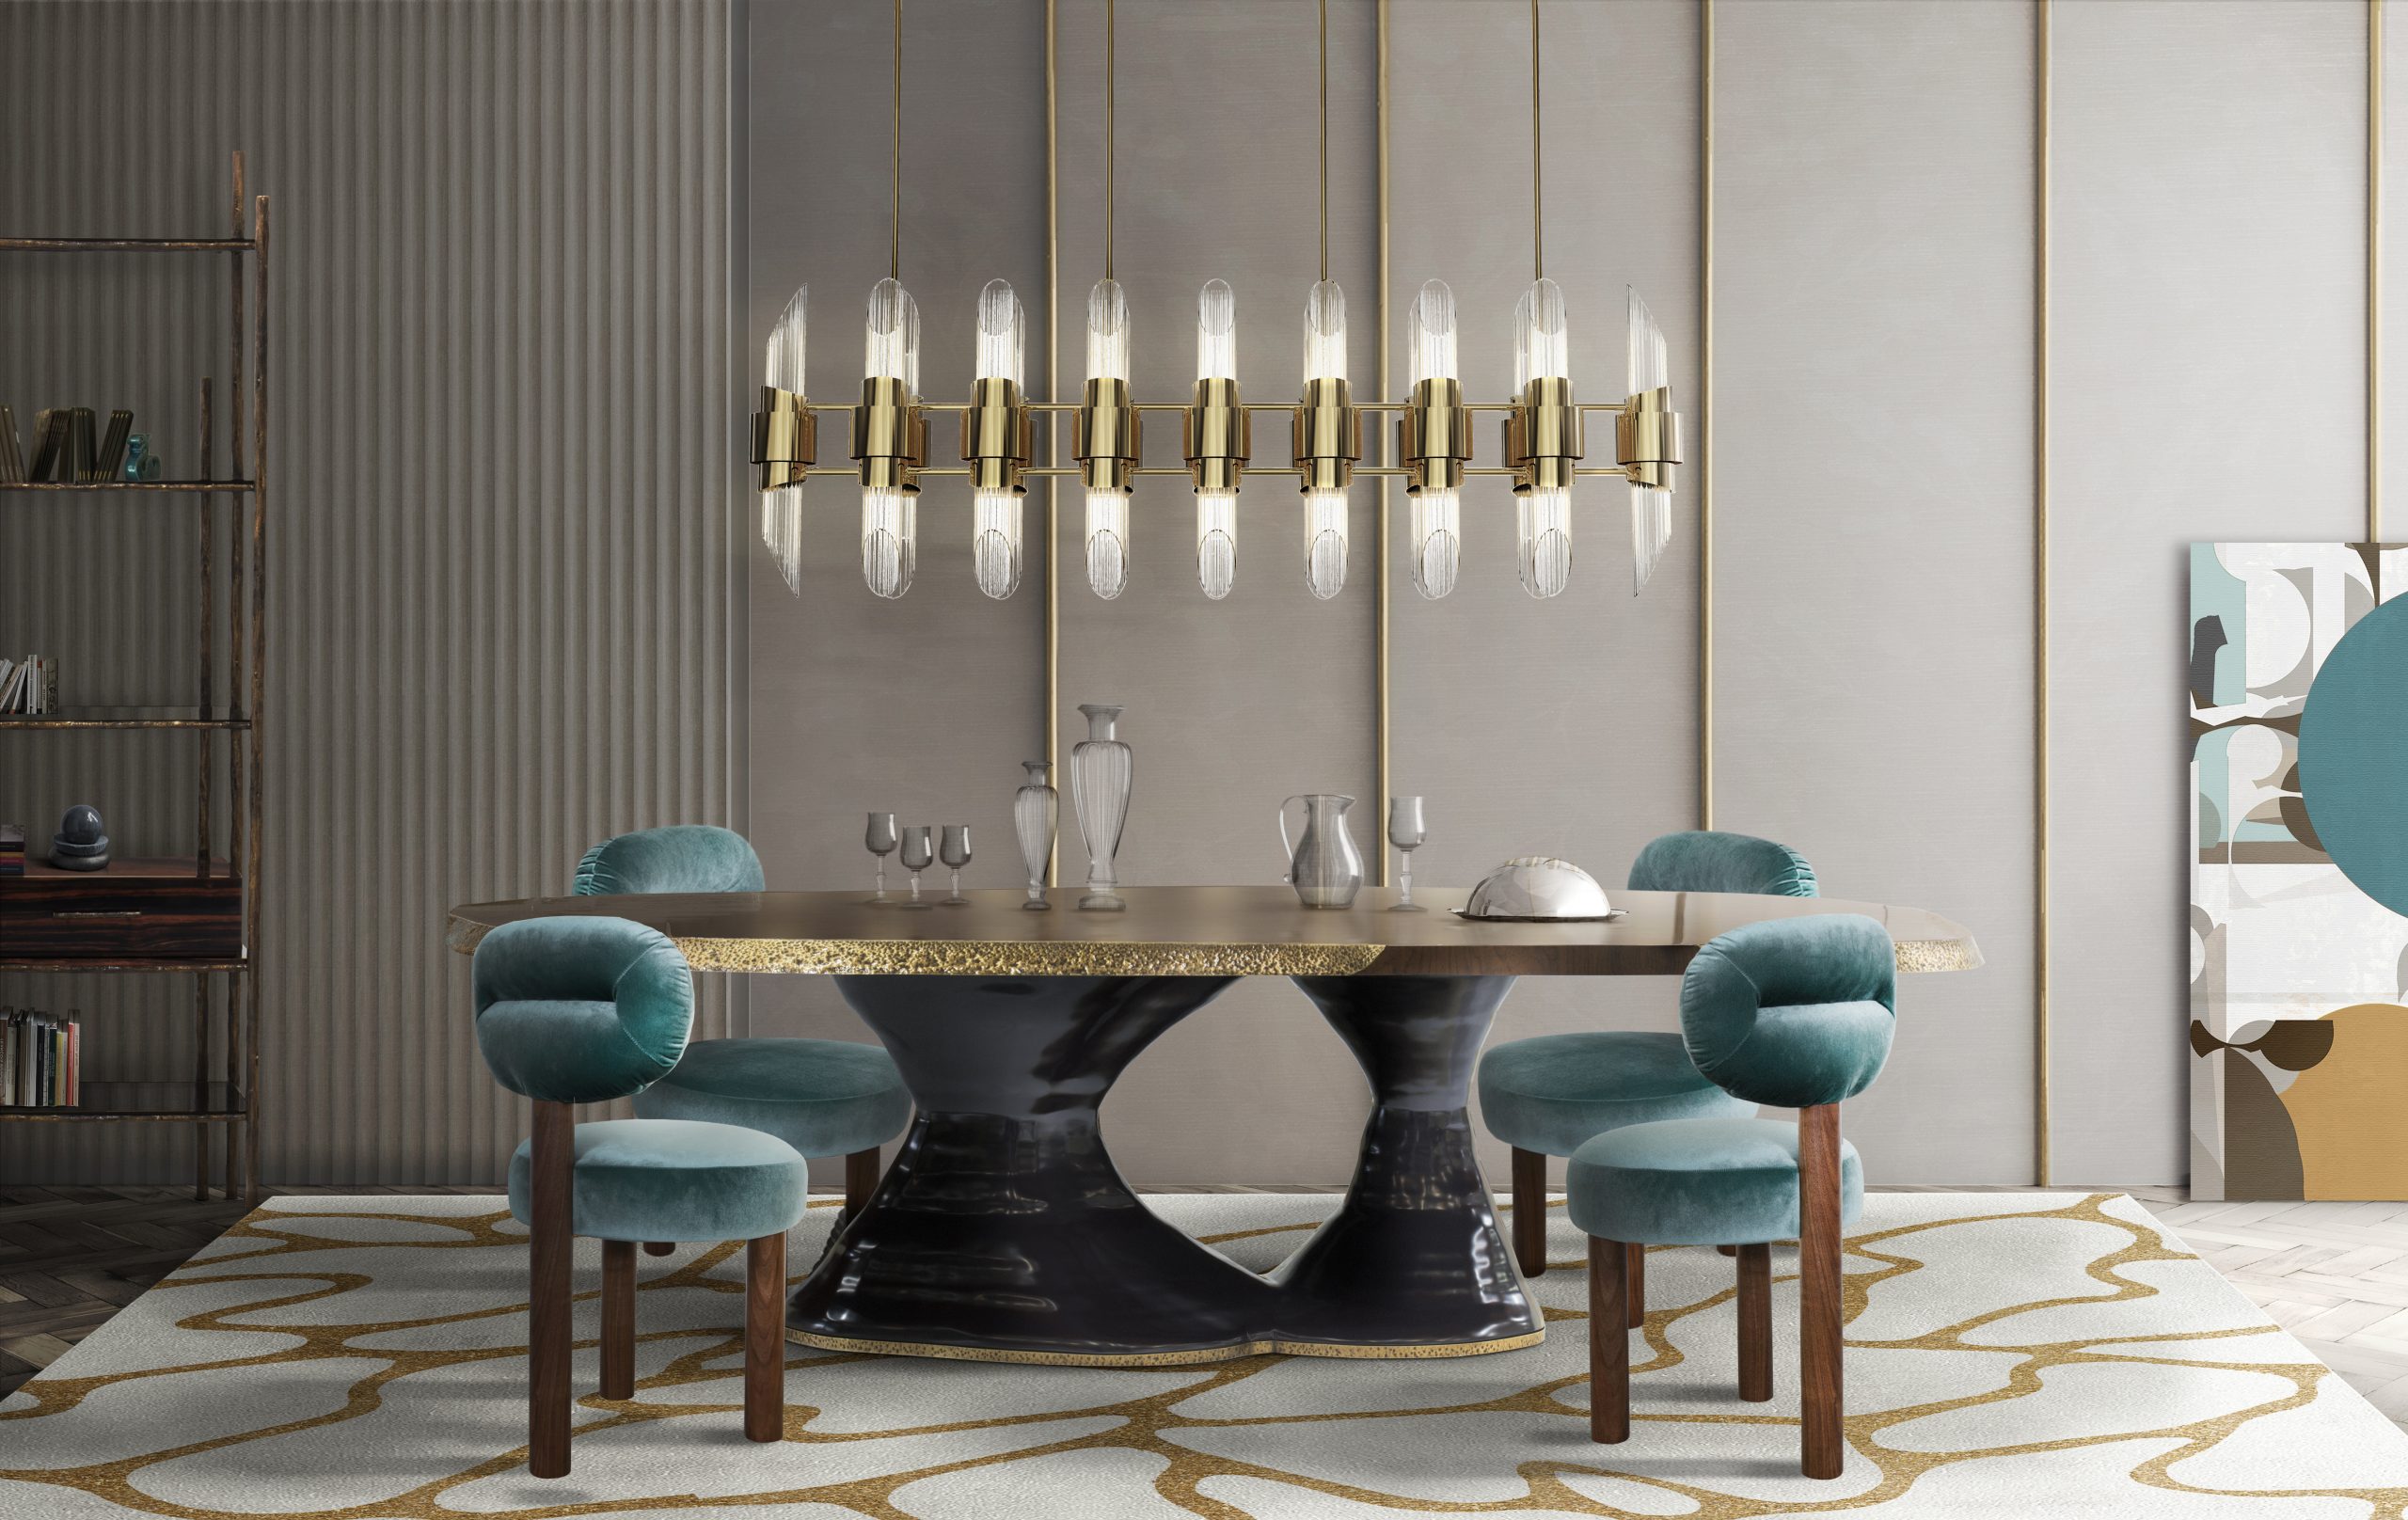 Elegant dining room with the stunning Cell Rug that embelisshes any space with its beautiful design. The golden details match perfectly with the table edges in brass and the wall lights.